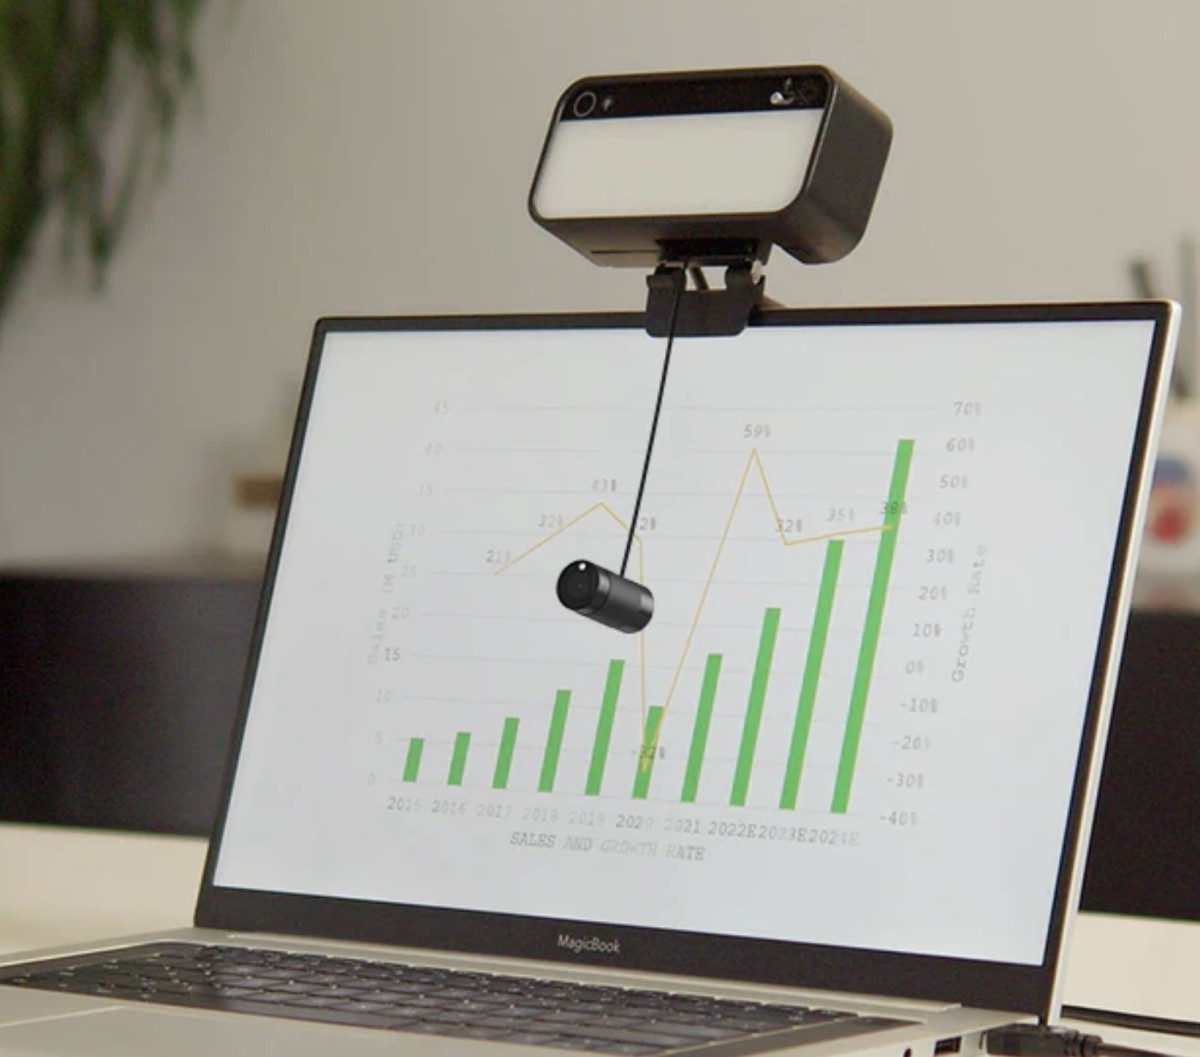 The MECA 3 in 1 Webcam for Video Conferencing Puts Your Best Video Self Forward